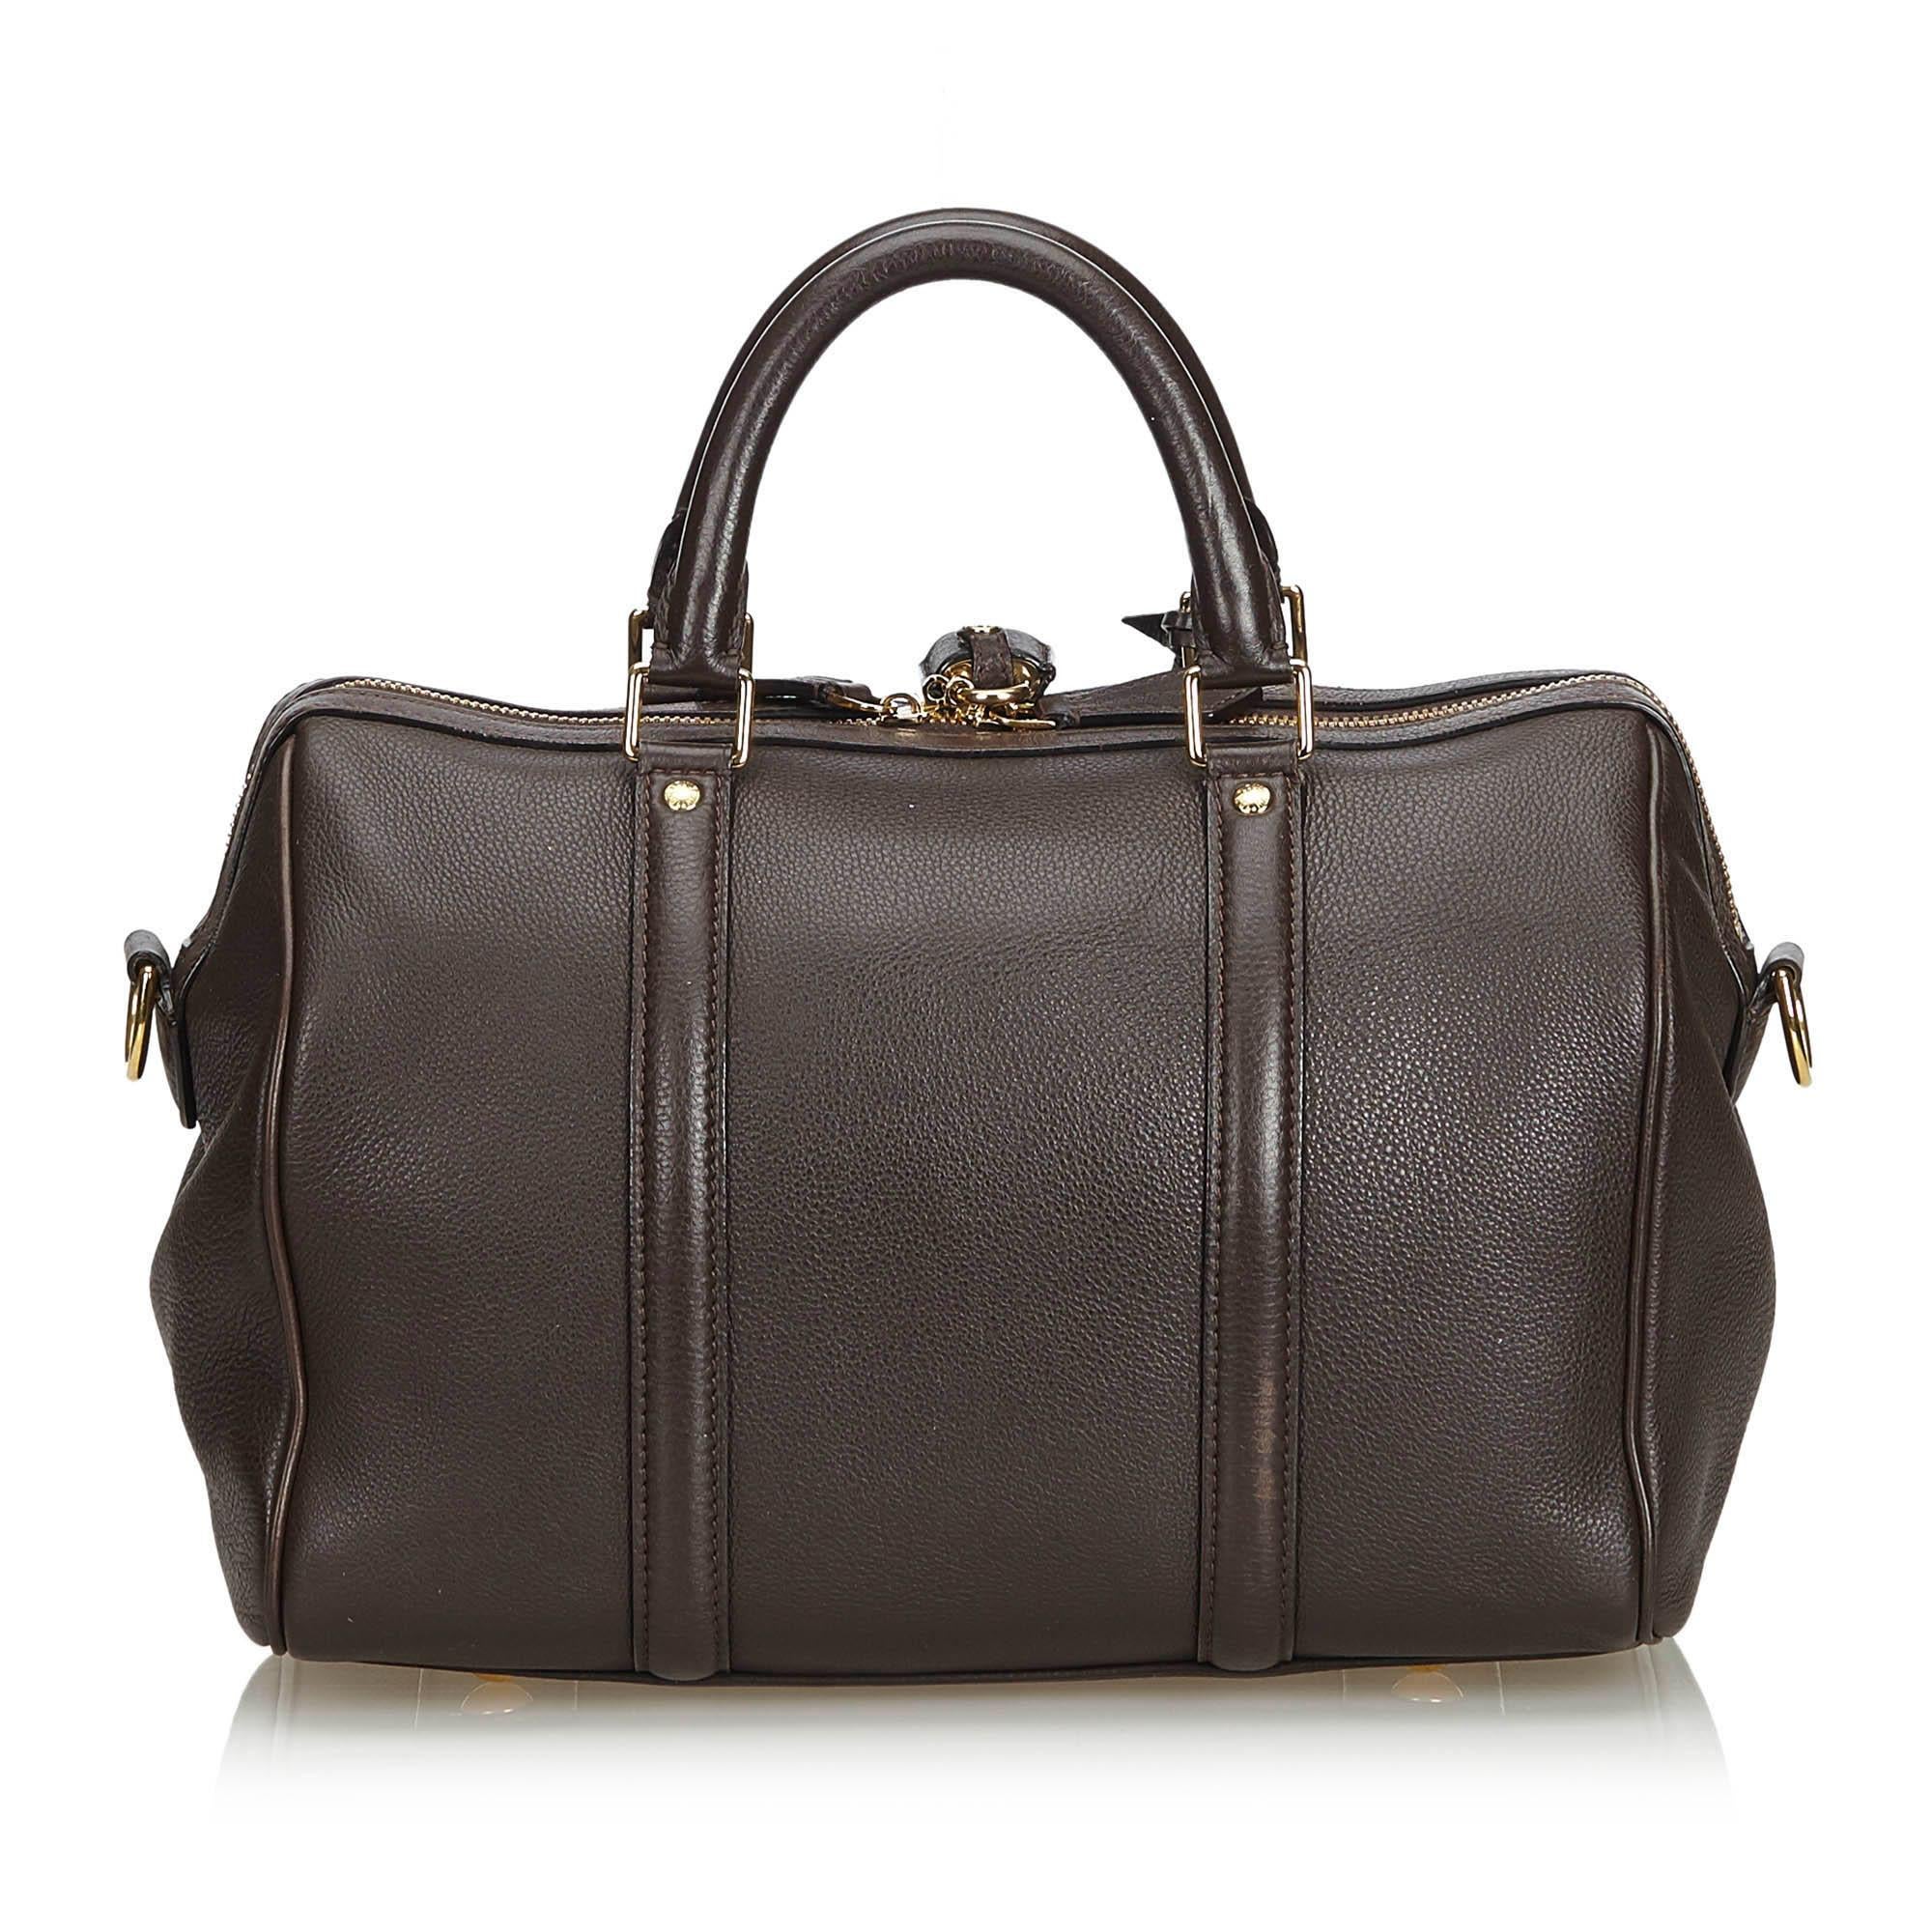 The Sofia Coppola features a leather body, rolled leather handles, a detachable flat leather strap, a clochette, a top zip closure, and interior zip and slip pockets. It carries as B+ condition rating.

Inclusions: 
Dust Bag
Padlock
Key


Louis